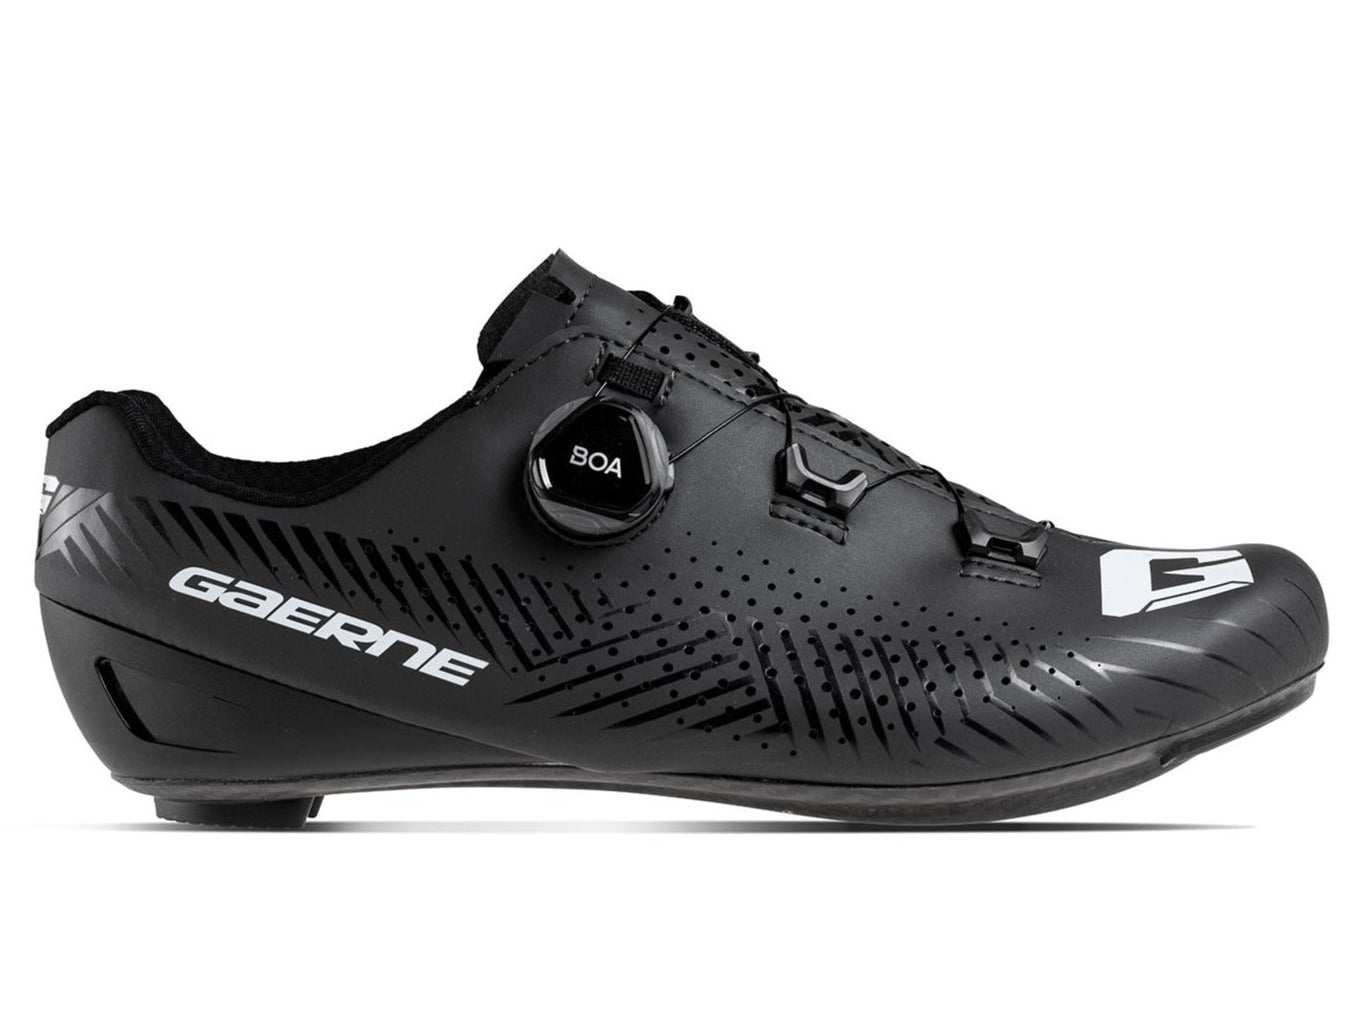 GAERNE CARBON G.TUONO ROAD SHOES